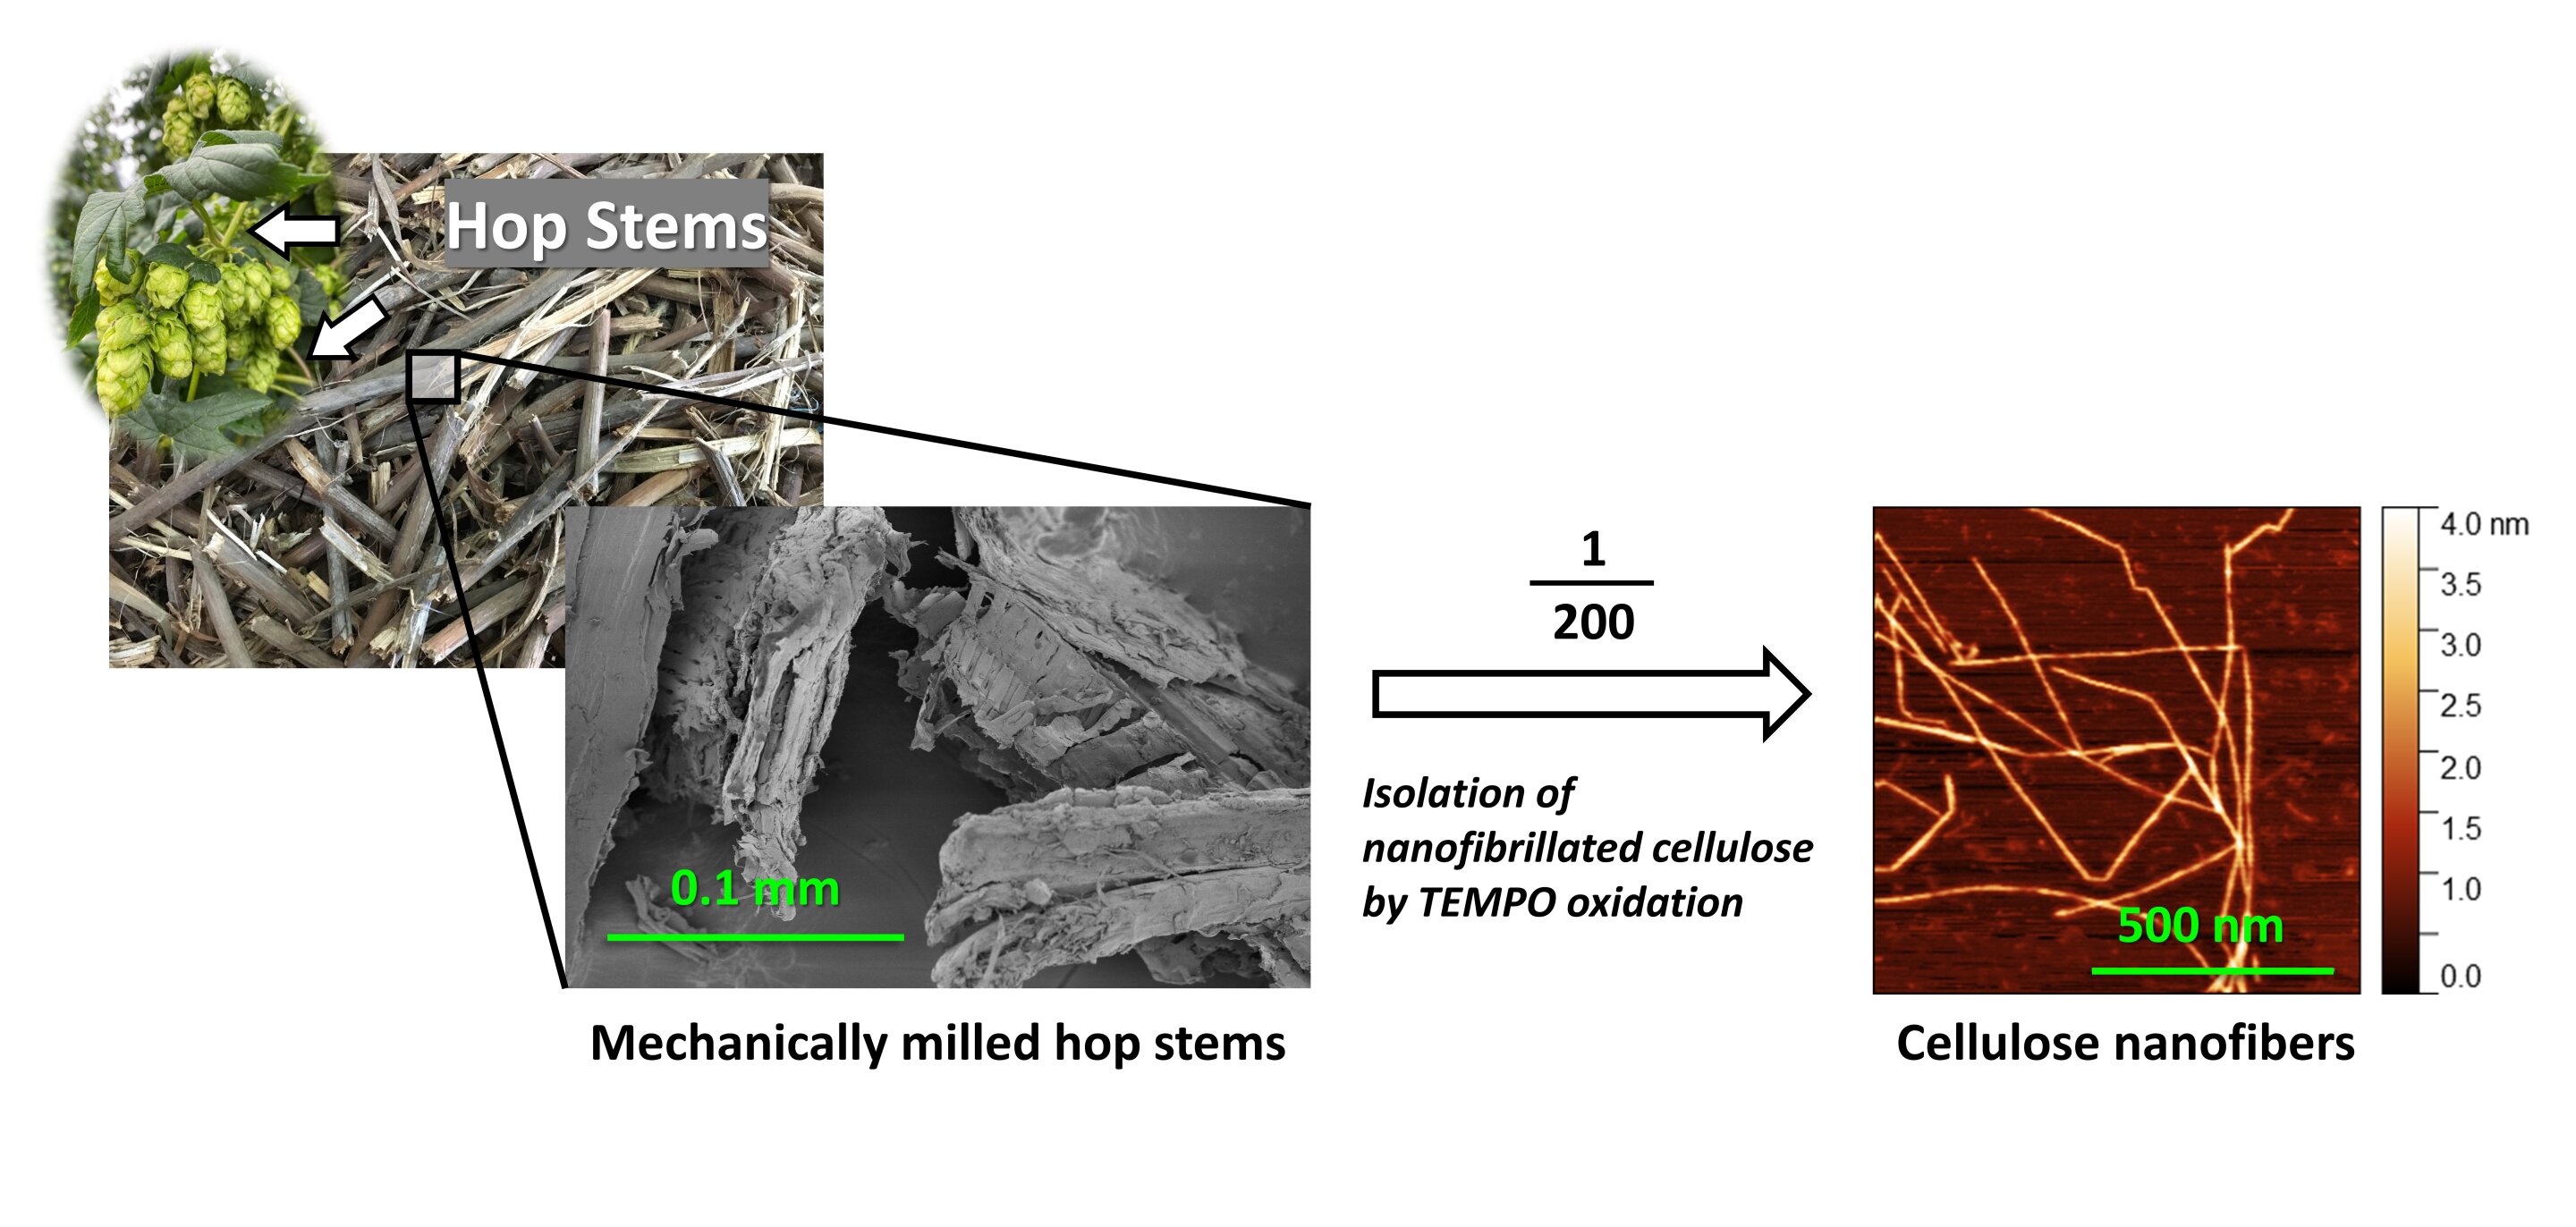 Waste hop stem in the beer industry upcycled into cellulose nanofibers